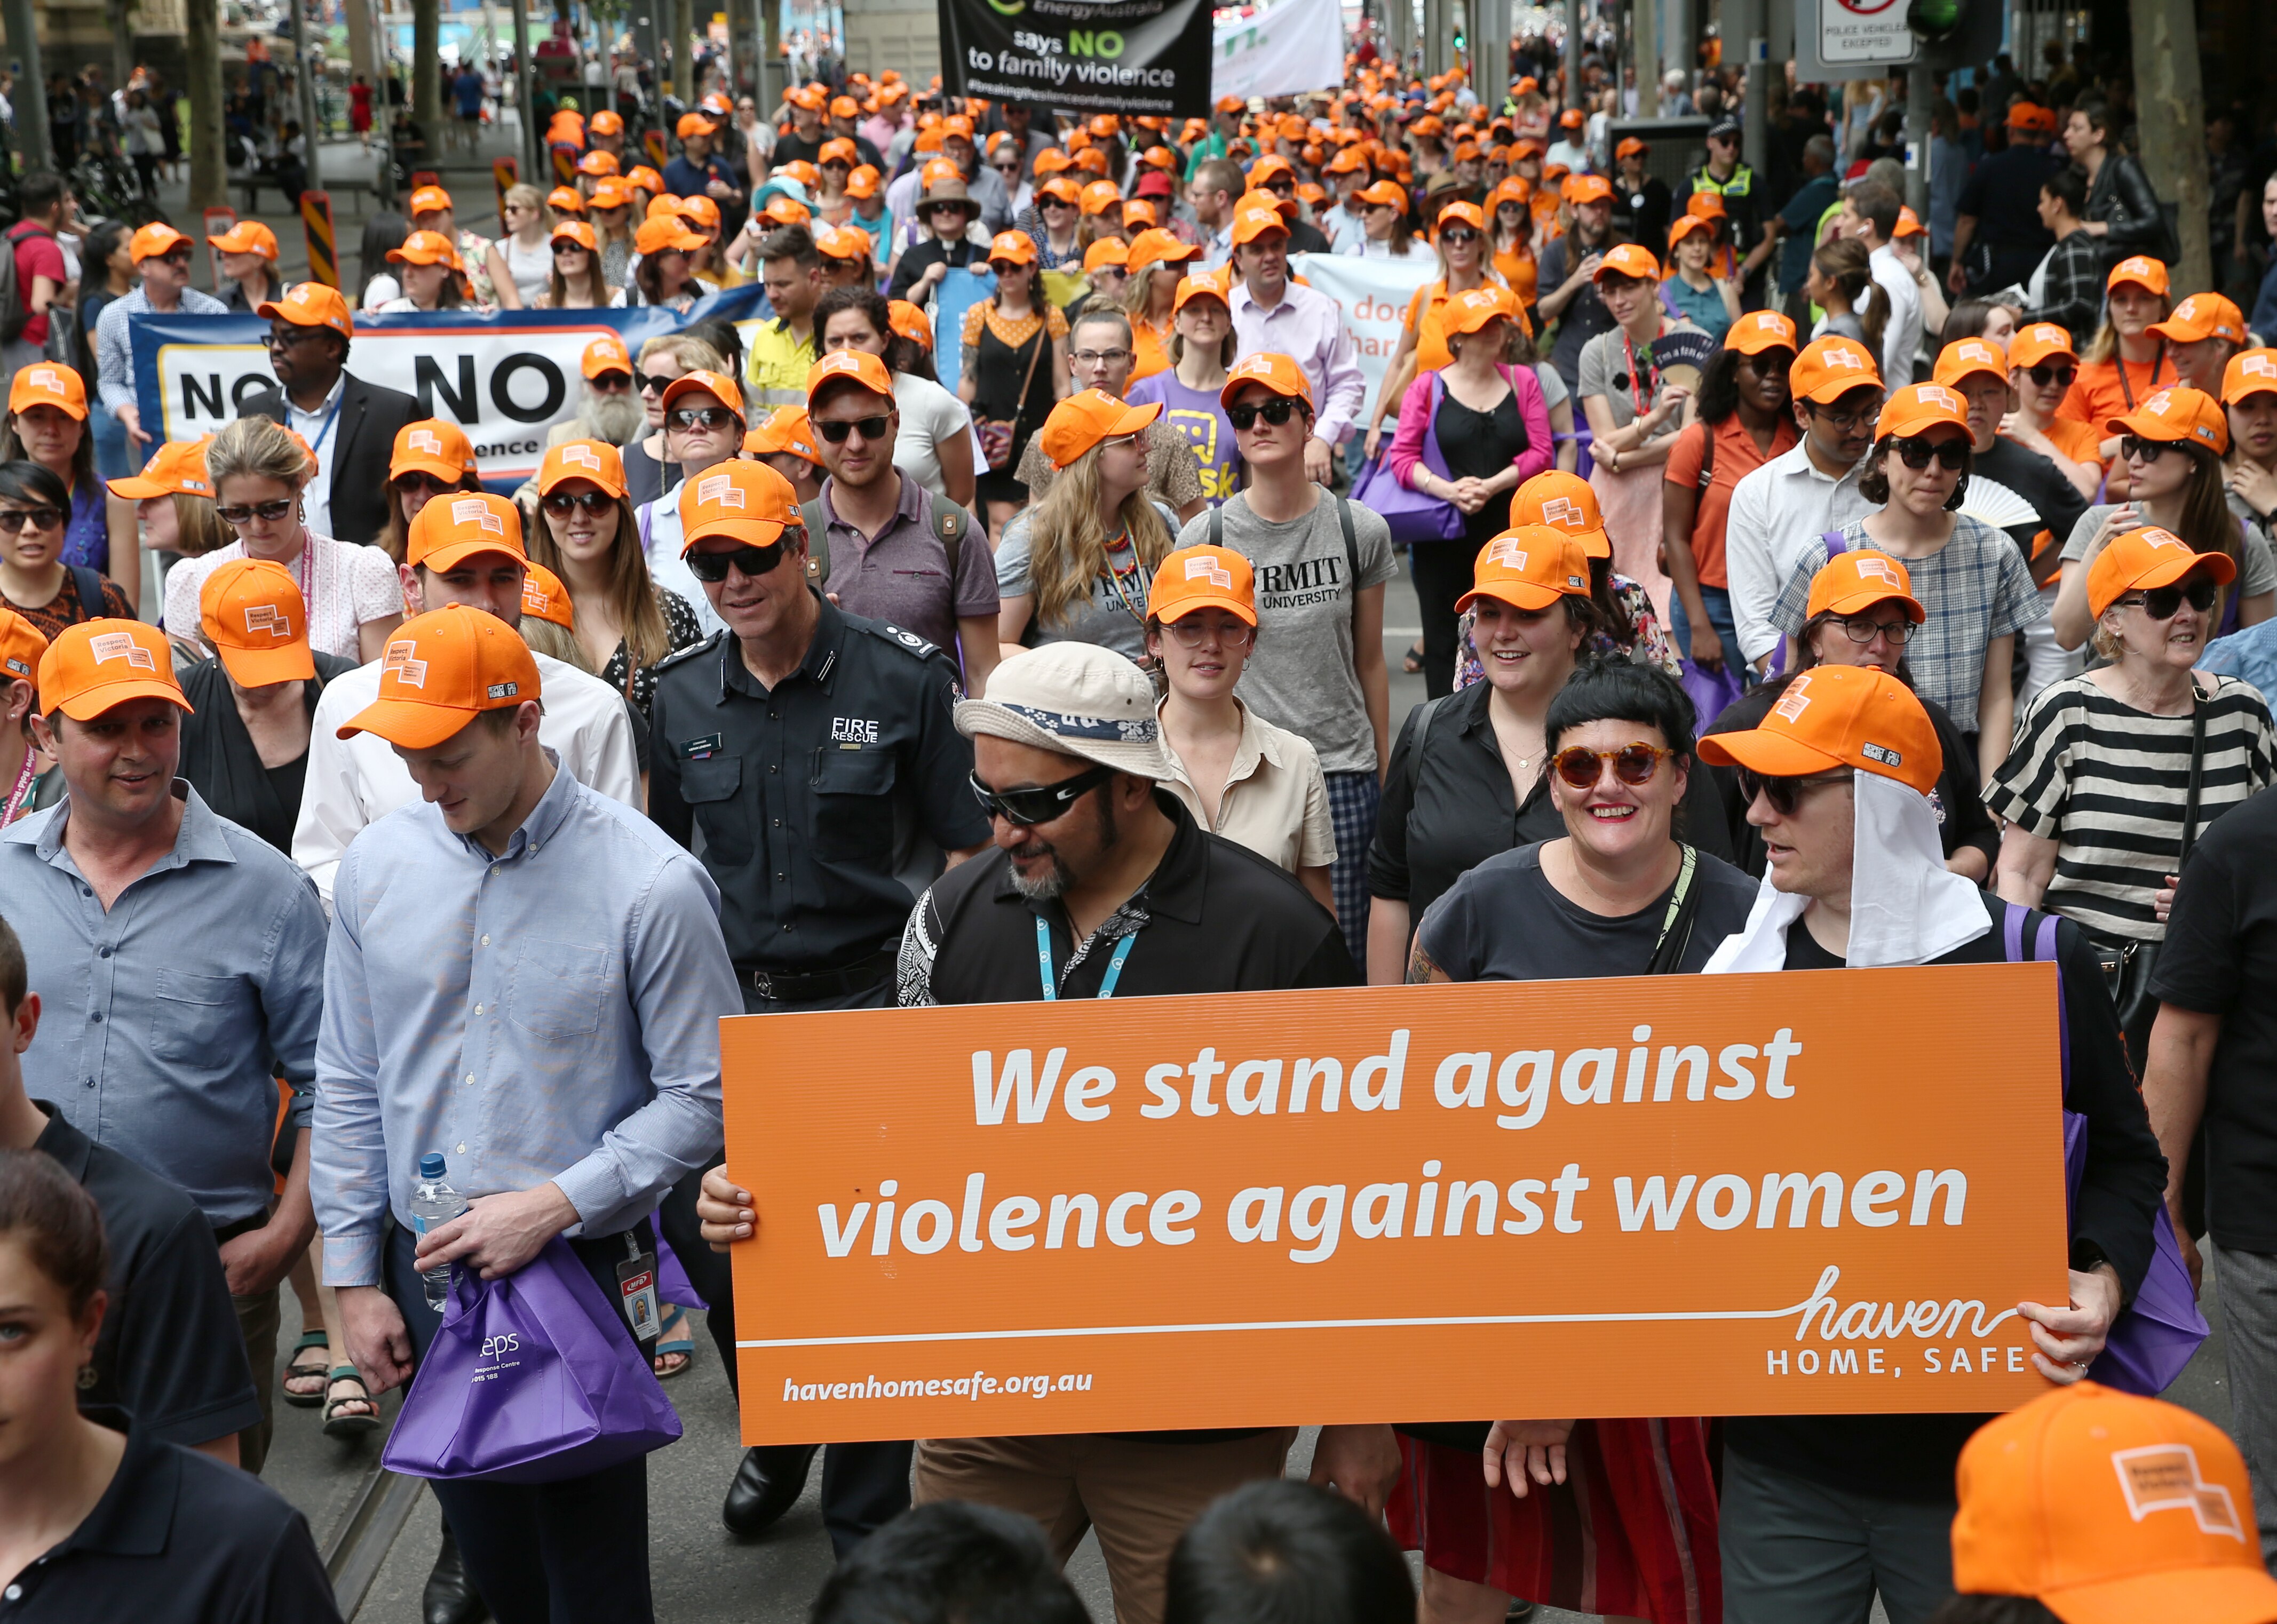 Participants are seen marching during the 11th annual Walk Against Family Violence in Melbourne, Monday, November 25, 2019. (AAP Image/David Crosling) NO ARCHIVING